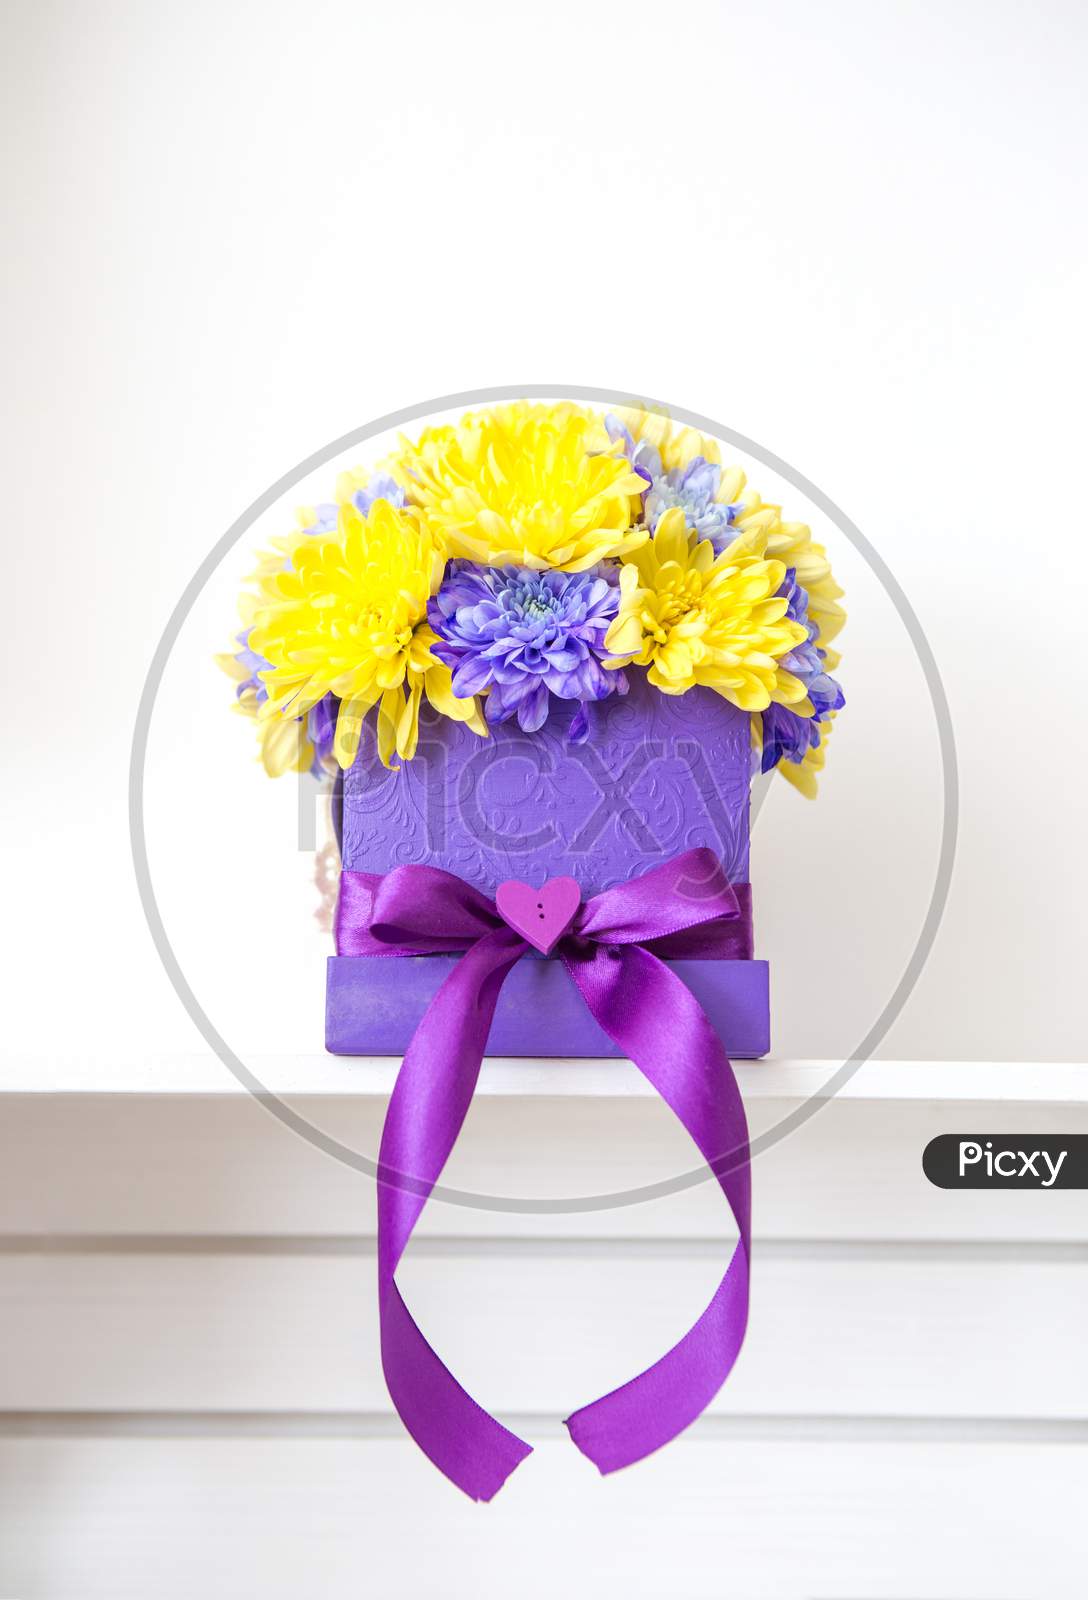 Beautiful Decoration Of Chrysanthemum Flowers. The Flowers Are Yellow And Purple And Are In The Handmade Box With The Bow Also Purple. Behind Is A White Background.